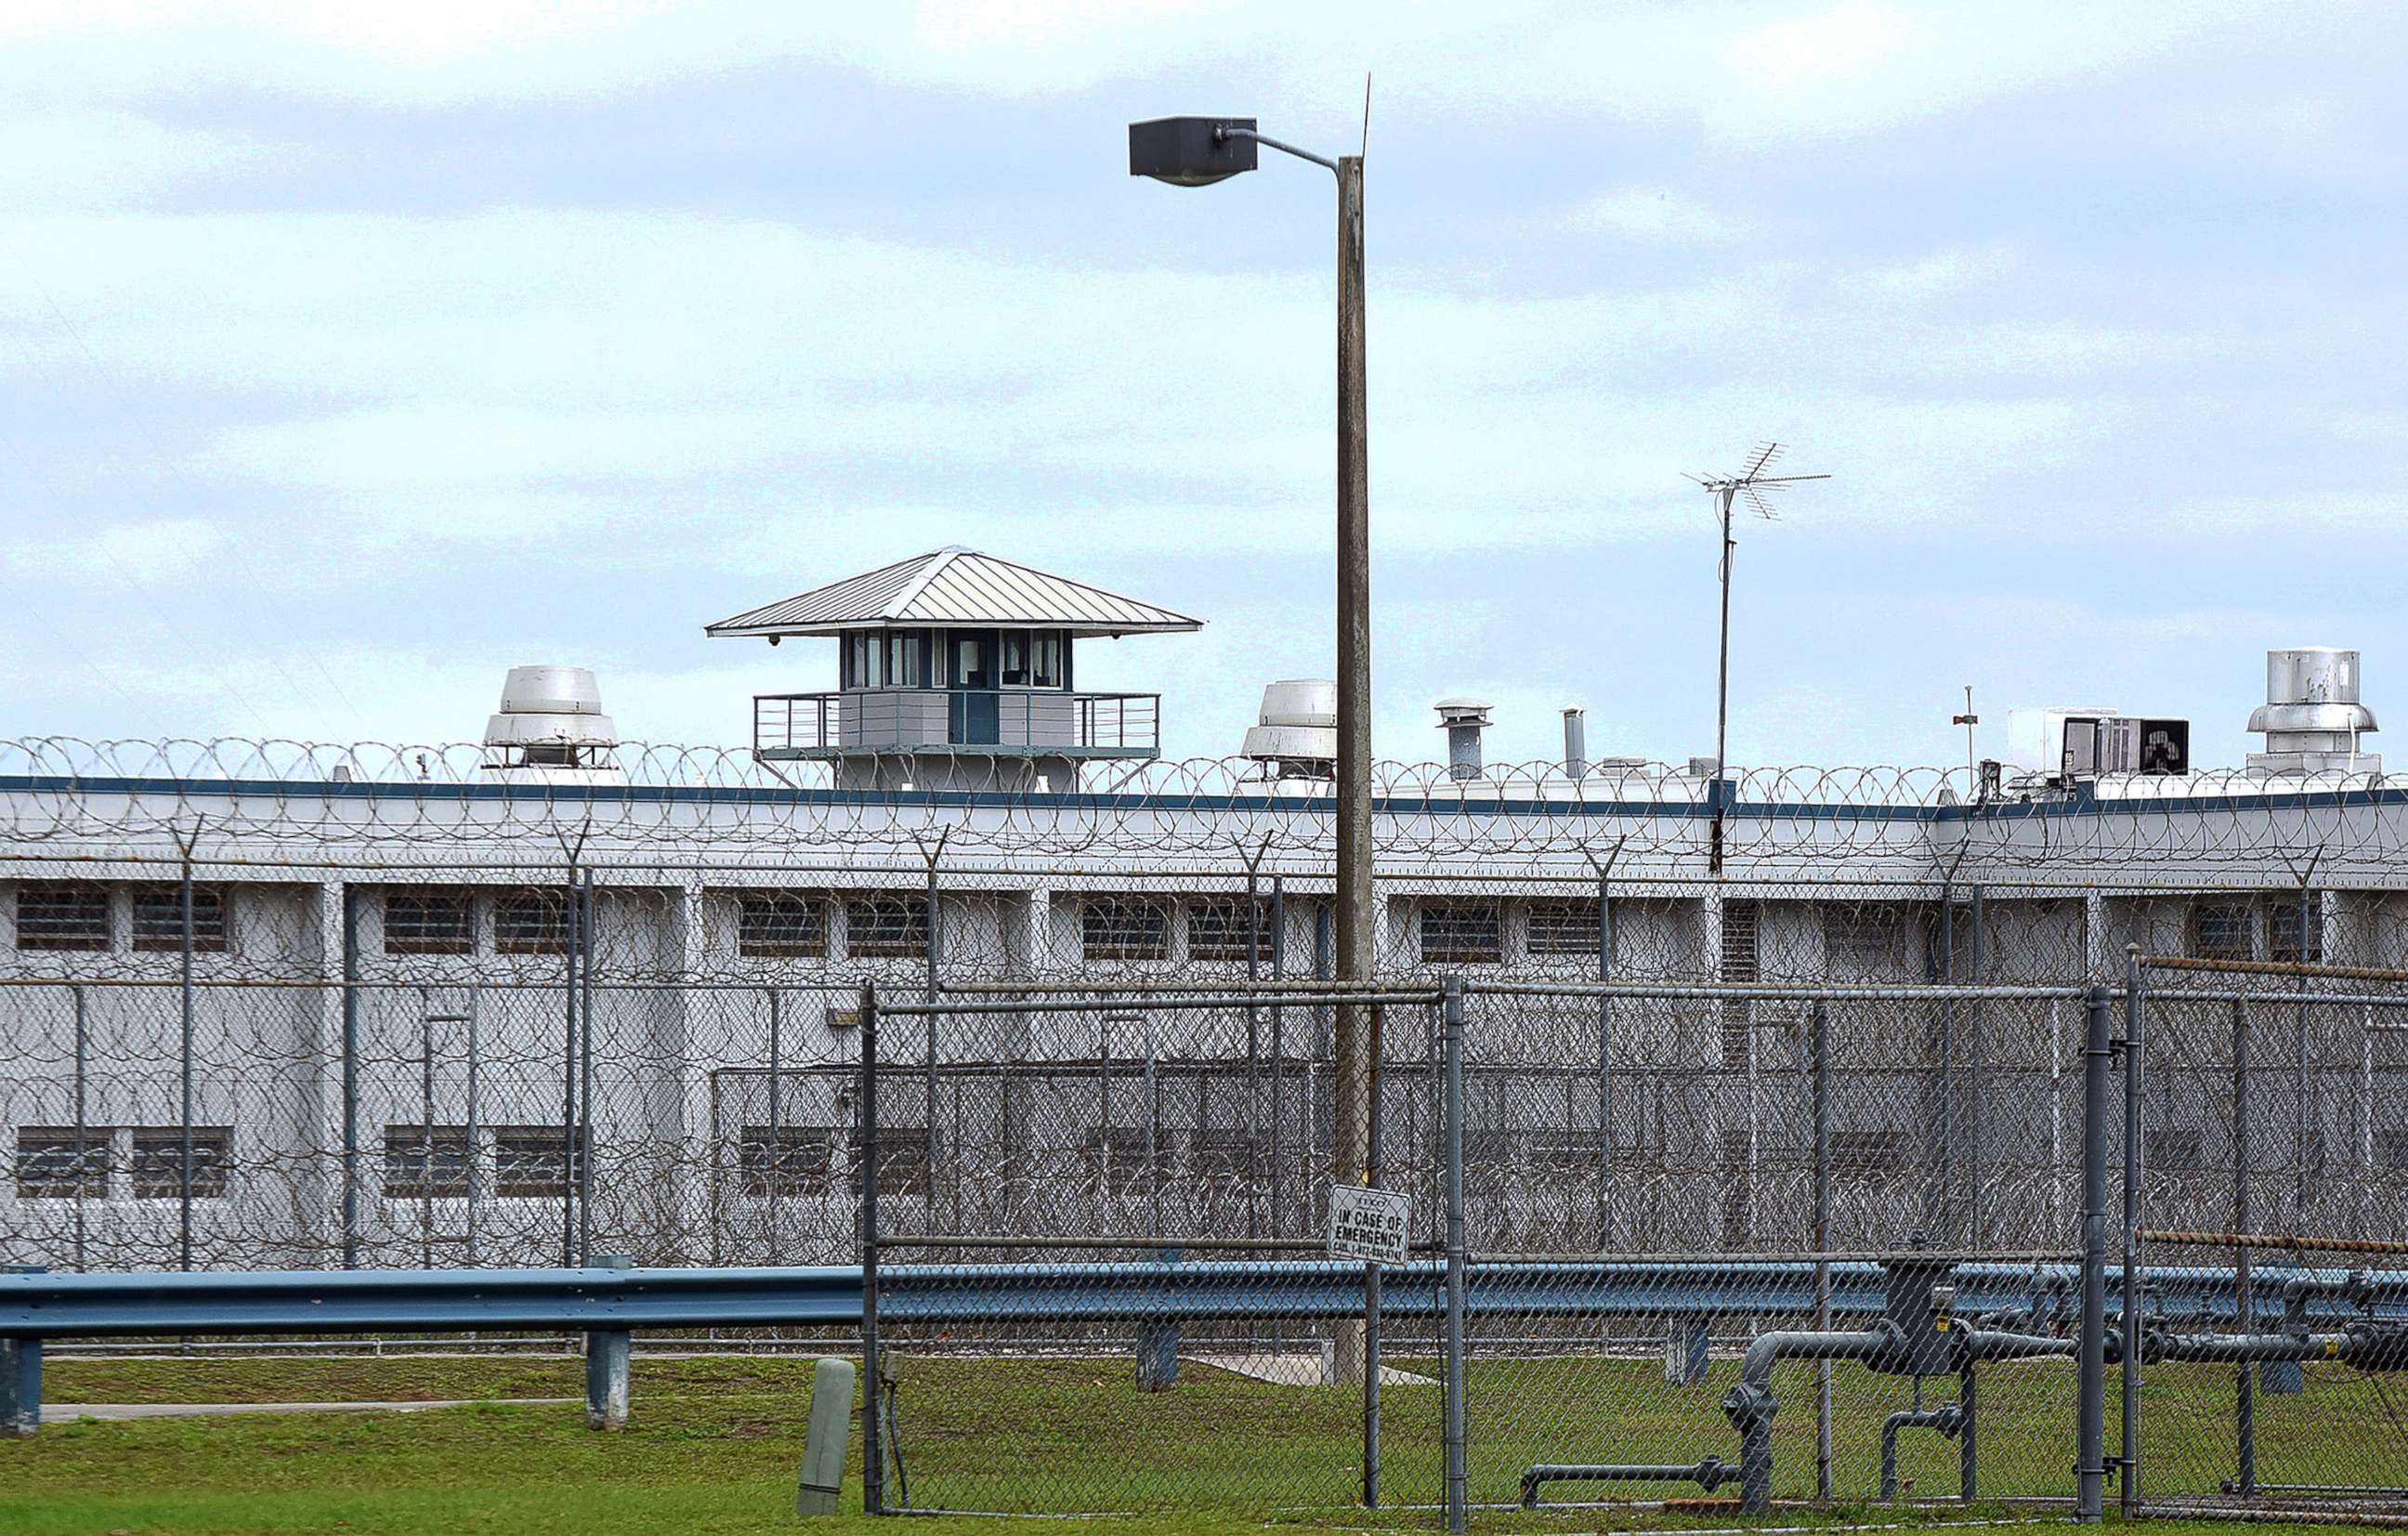 PHOTO: Tomoka Correctional Institution in Daytona Beach, Fla., on April 25, 2020, where inmates and staff tested positive for COVID-19.